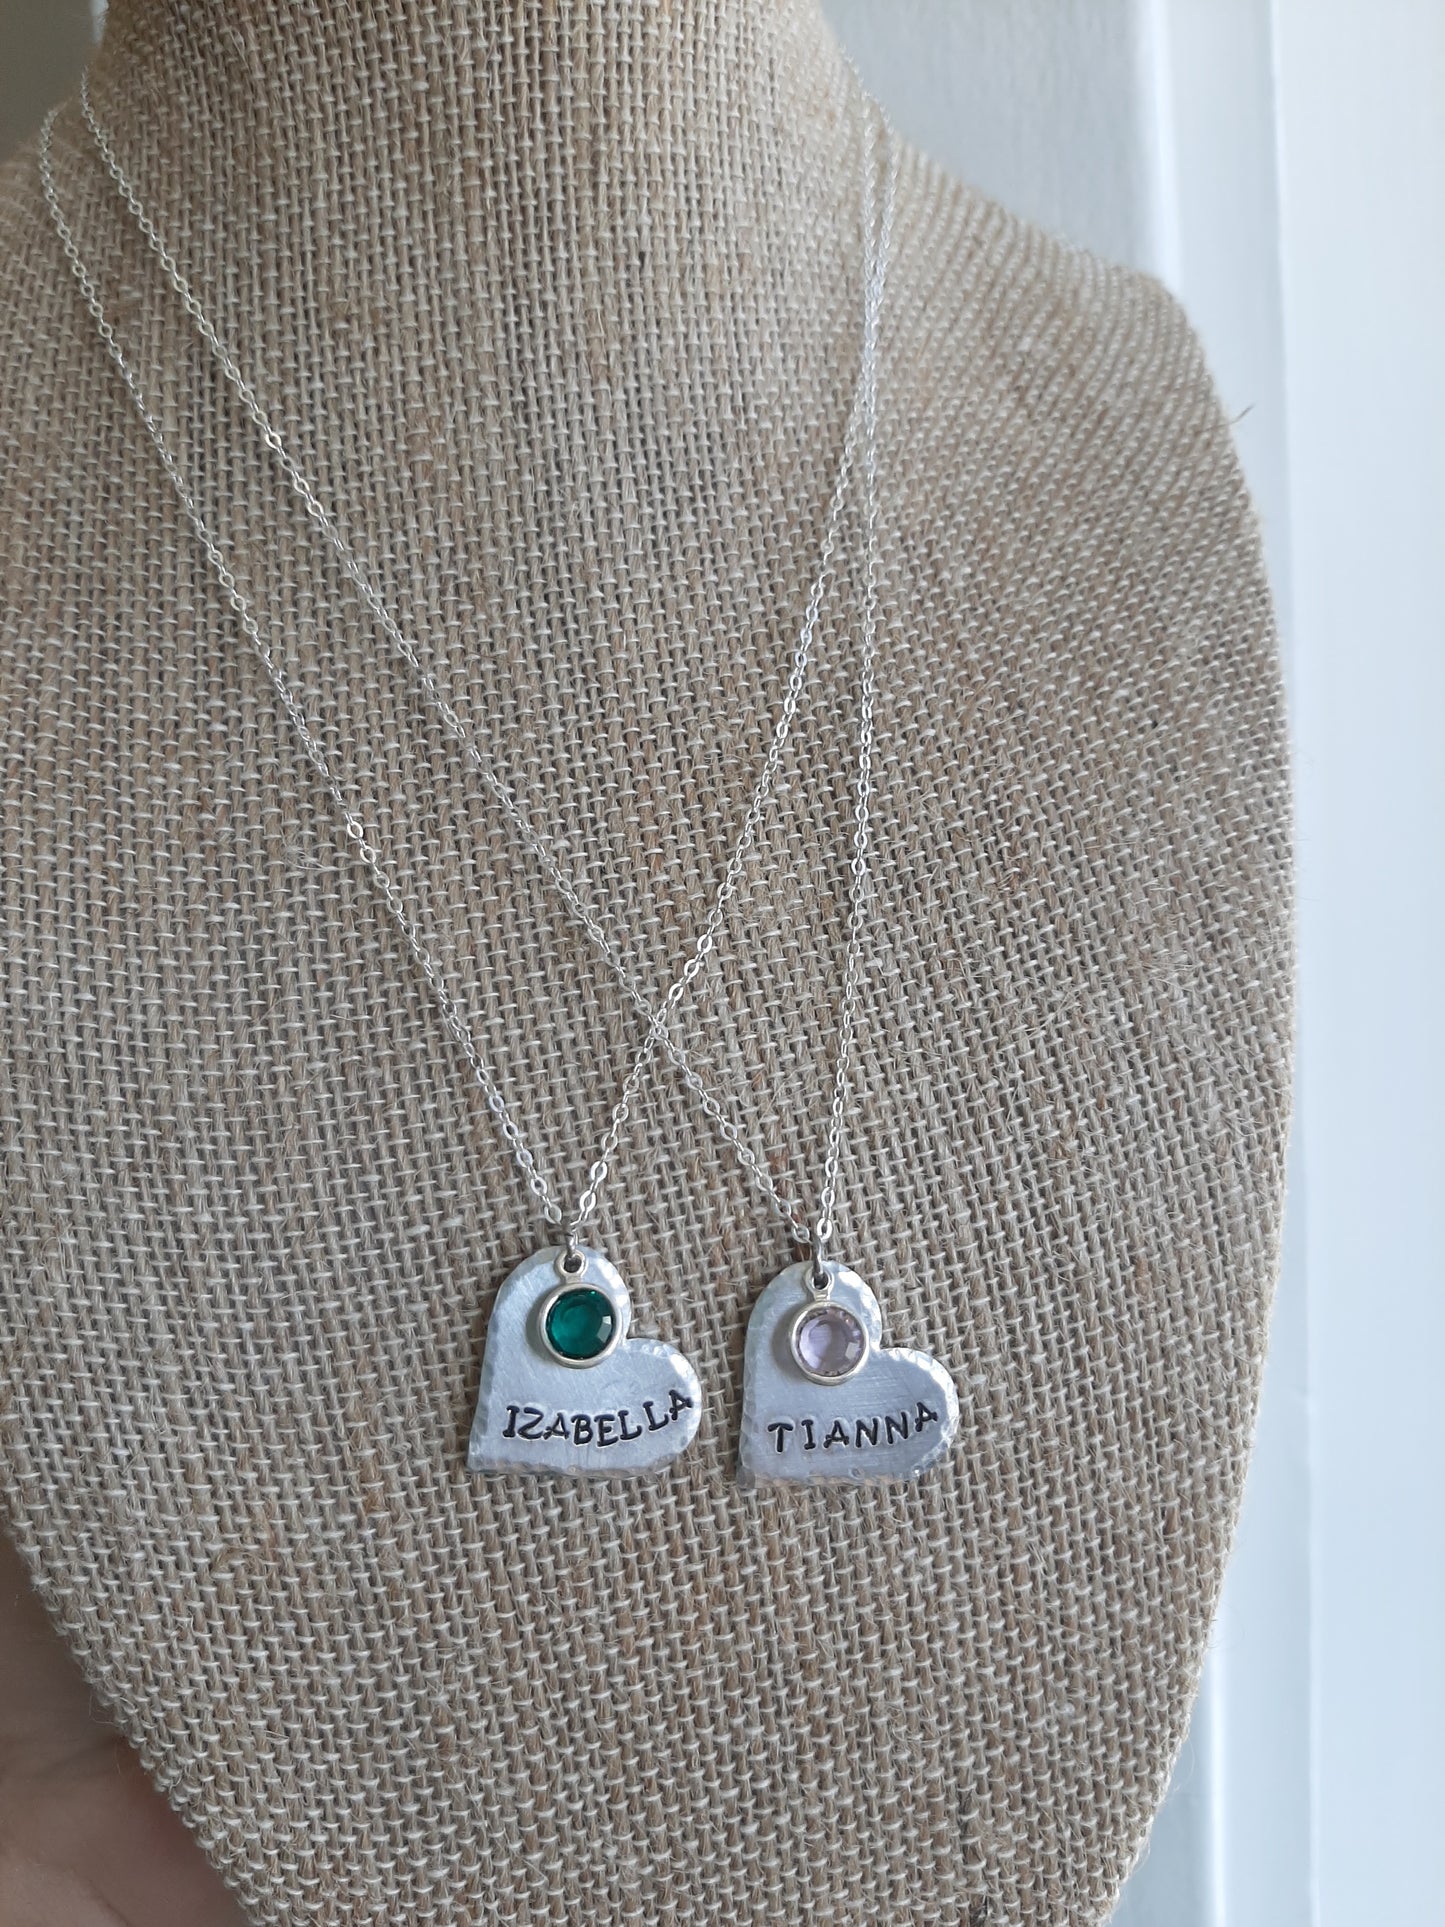 Heart Name Necklace with Birthstones